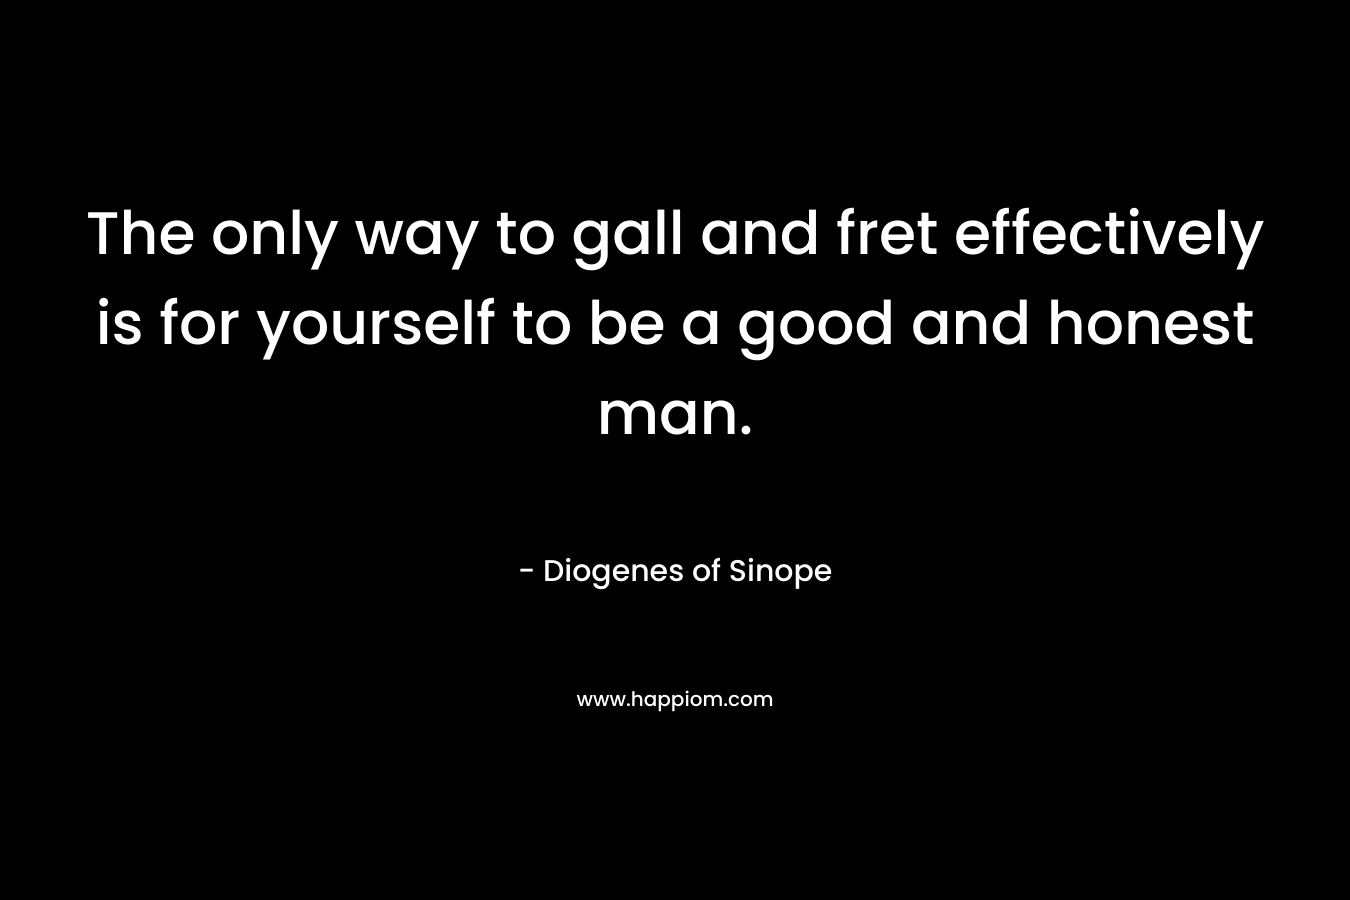 The only way to gall and fret effectively is for yourself to be a good and honest man. – Diogenes of Sinope